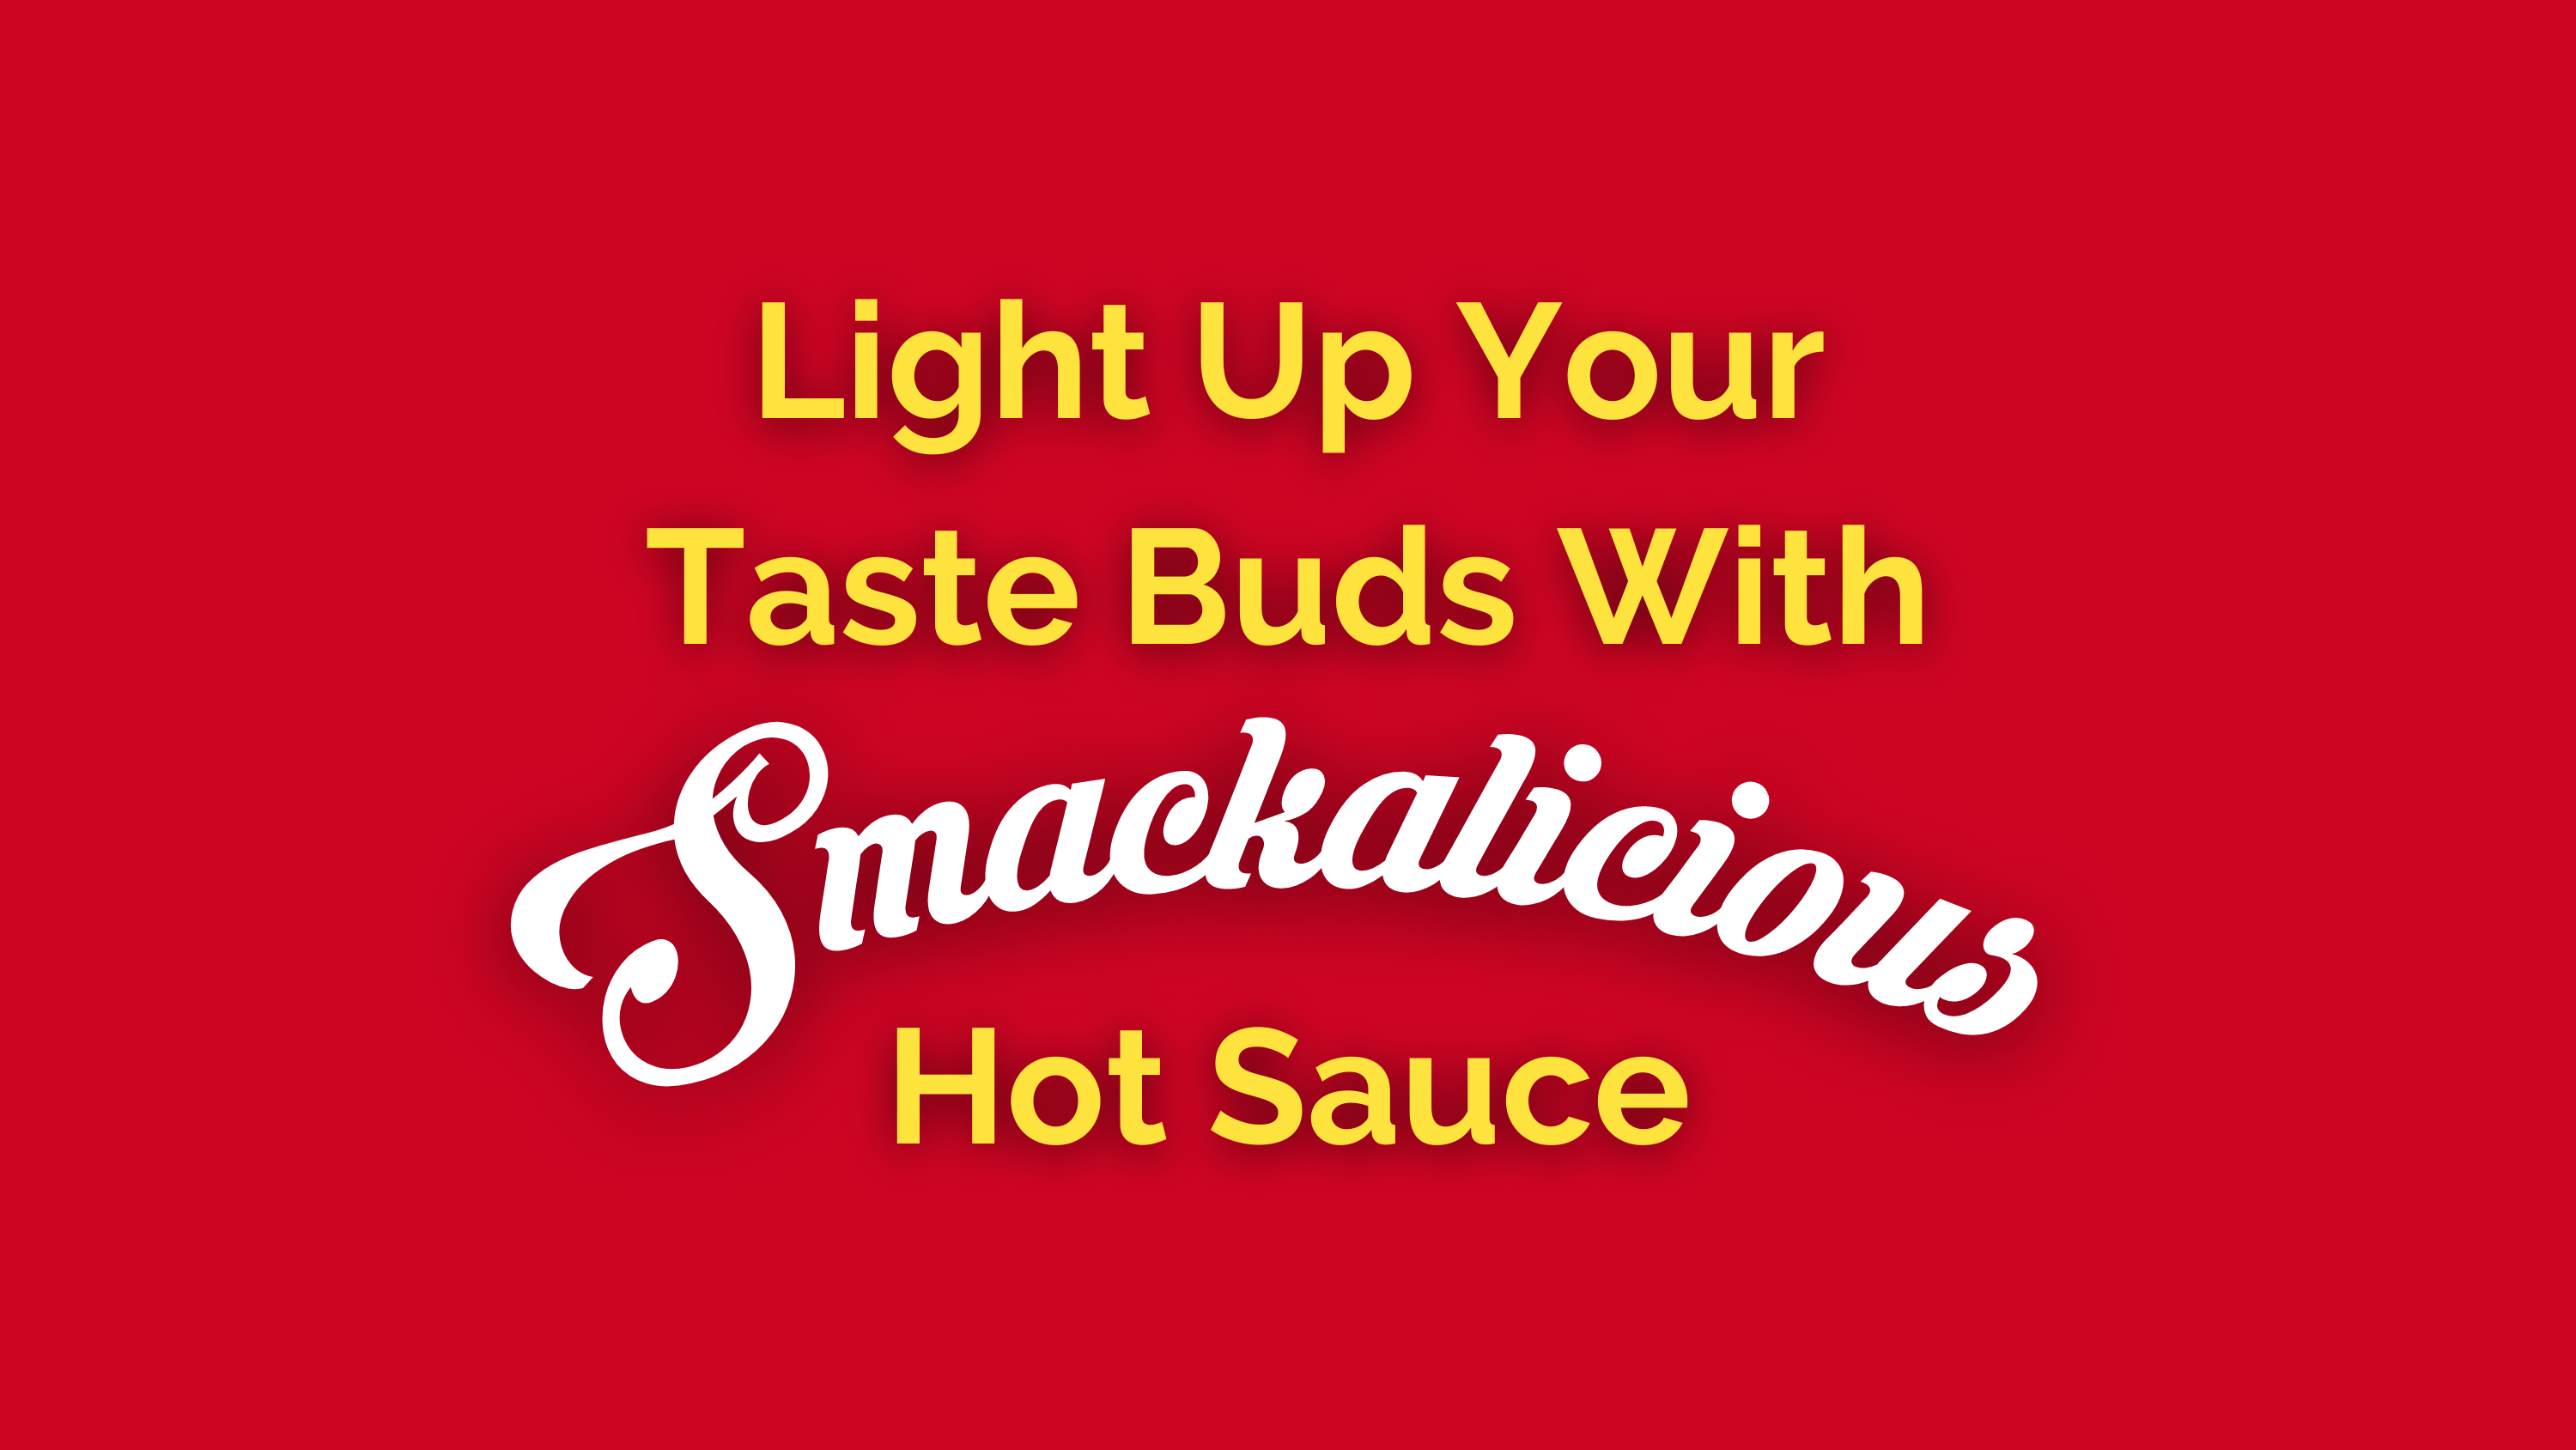 Light up your taste buds with smackalicious hot sauce